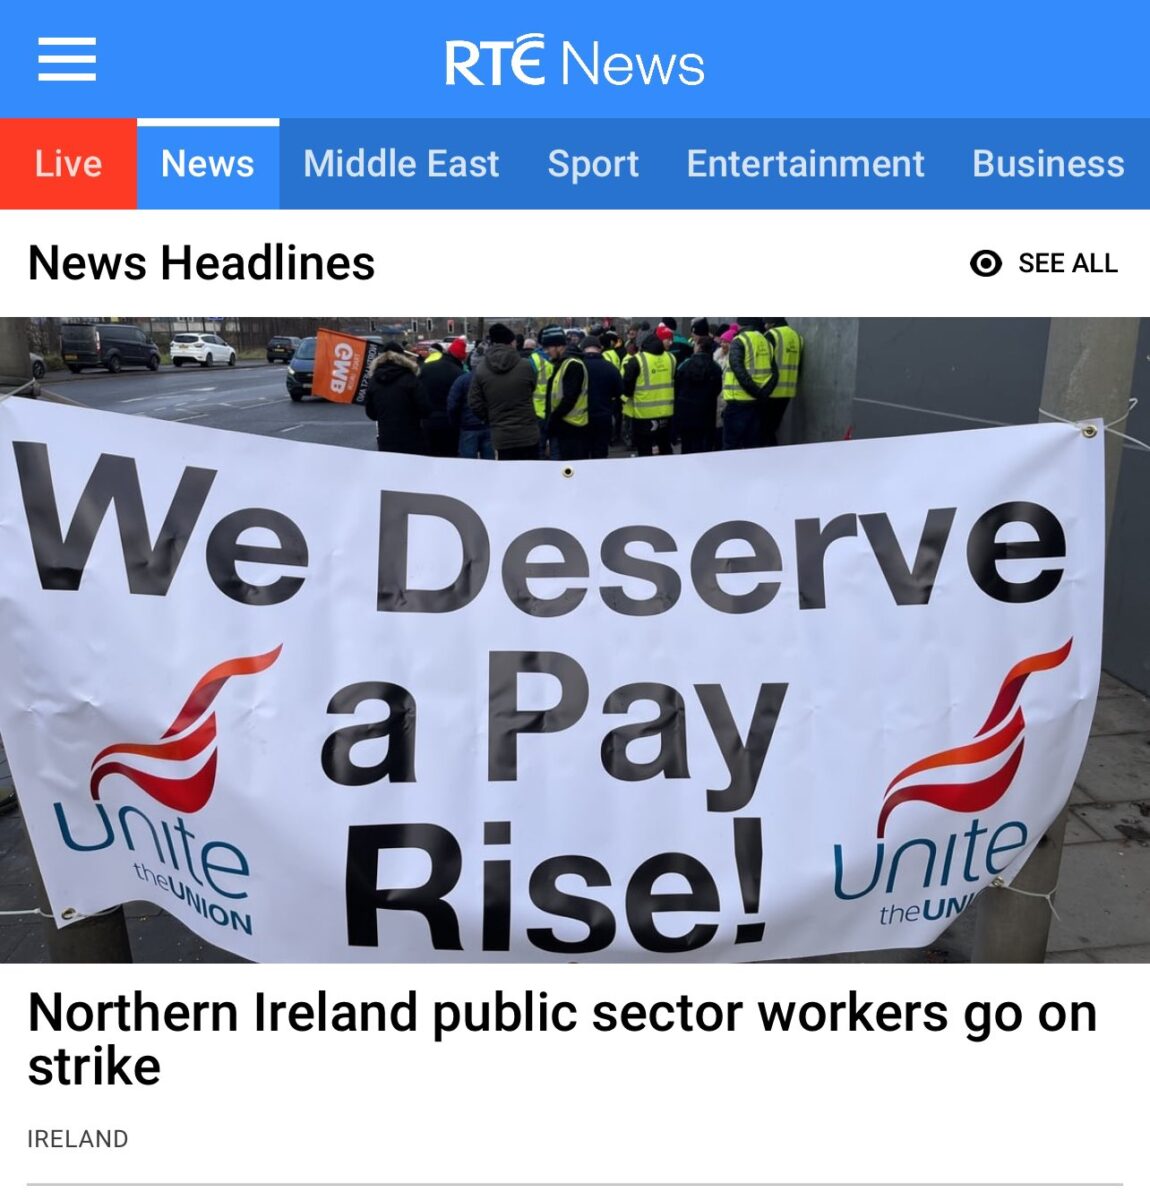 Snip from RTE website - shows banner with words "We deserve a pay rise"